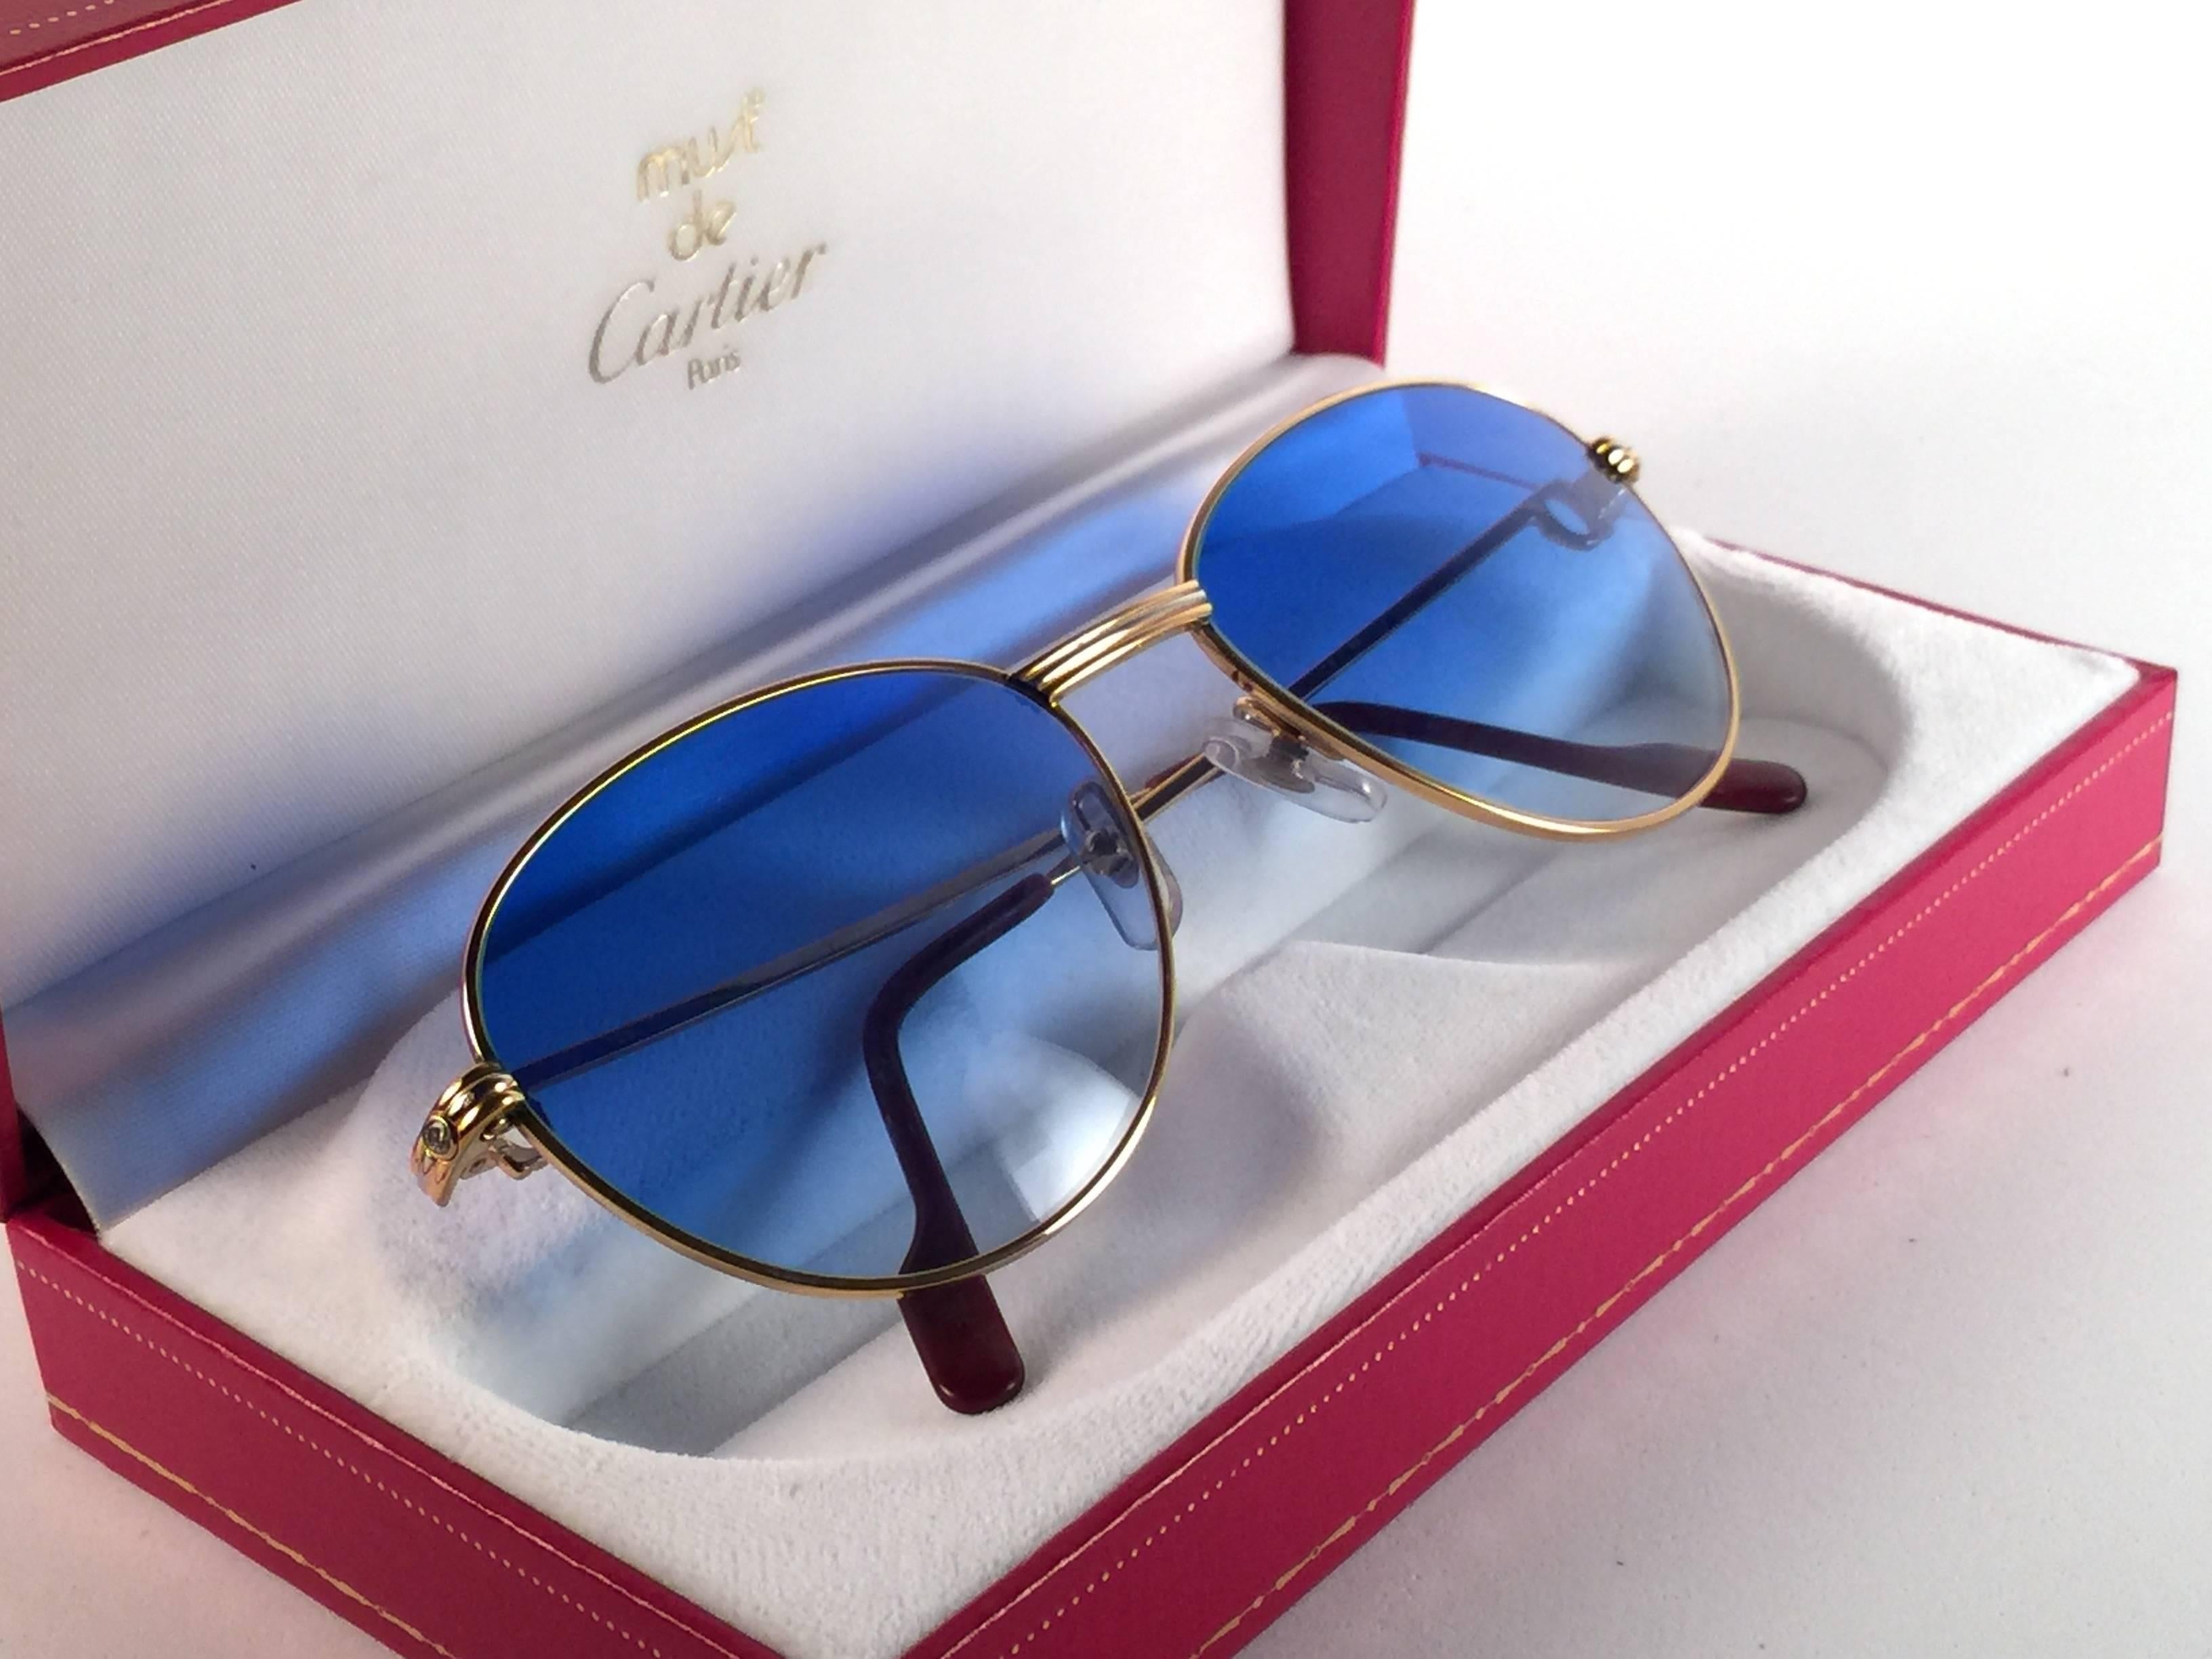 About
In Excellent condition Cartier Louis Diamonds rounded sunglasses with 2 real diamonds on the side of the frame. Blue gradient (uv protection) lenses. Frame is with the famous yellow and white gold accents on the front and on both sides. All